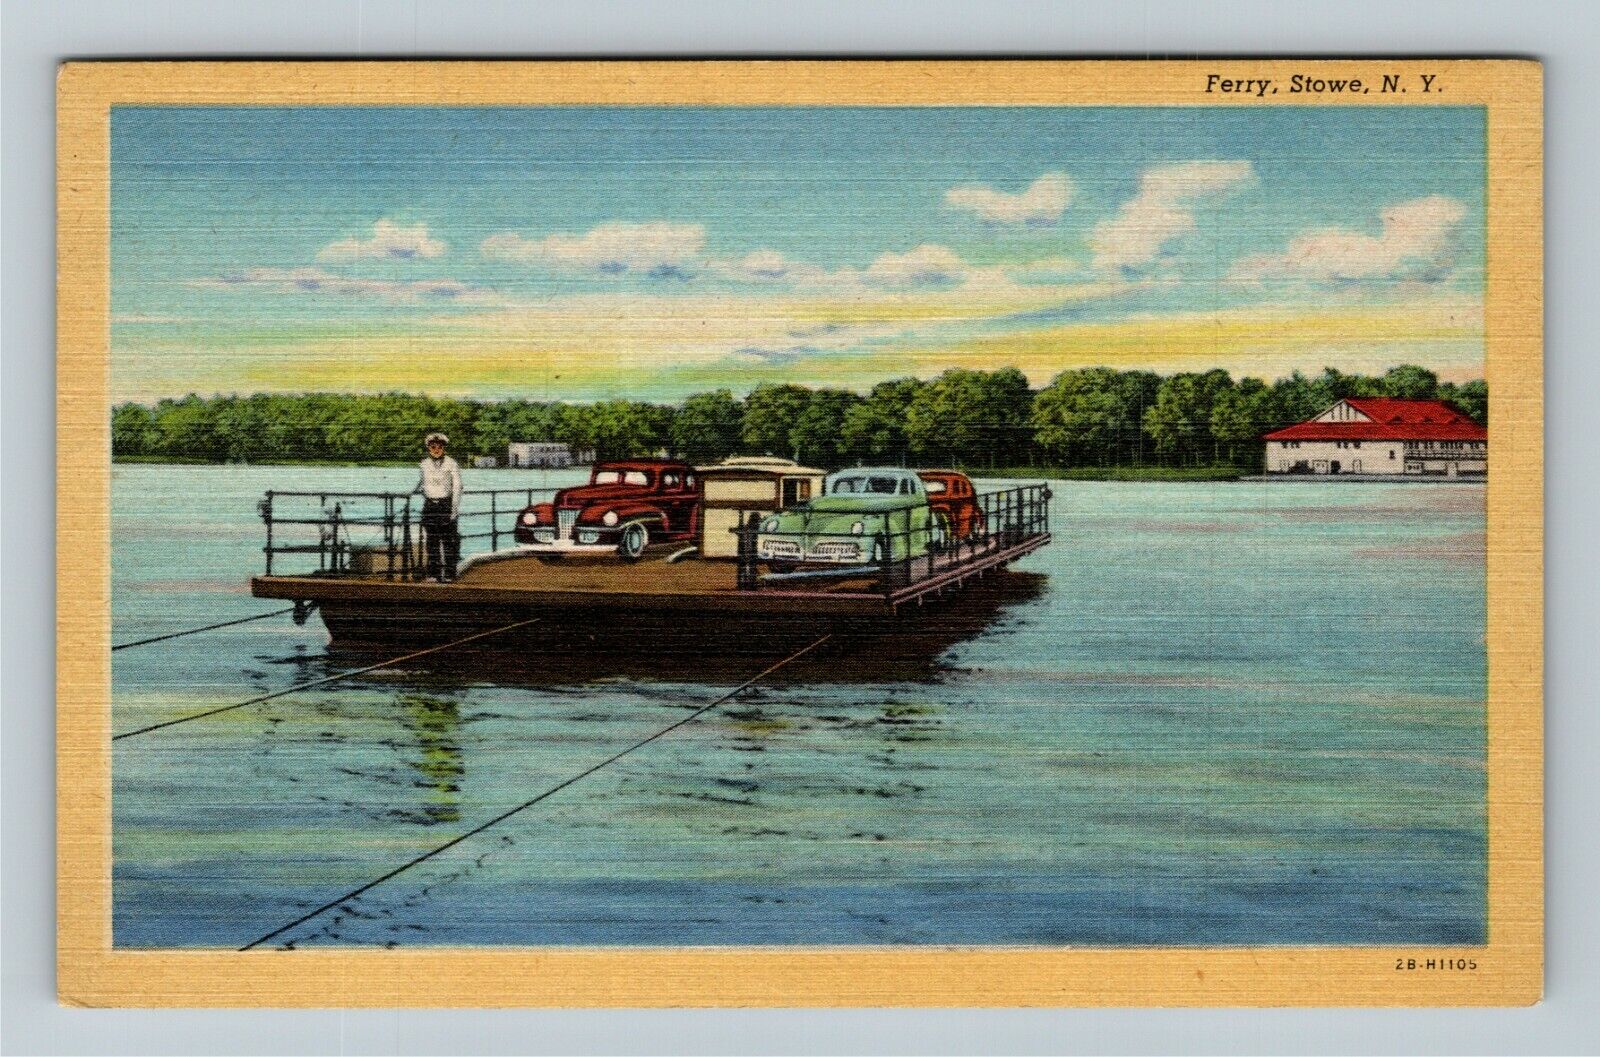 Stowe NY-New York, Ferry On The Water, Scenic View, Vintage Postcard